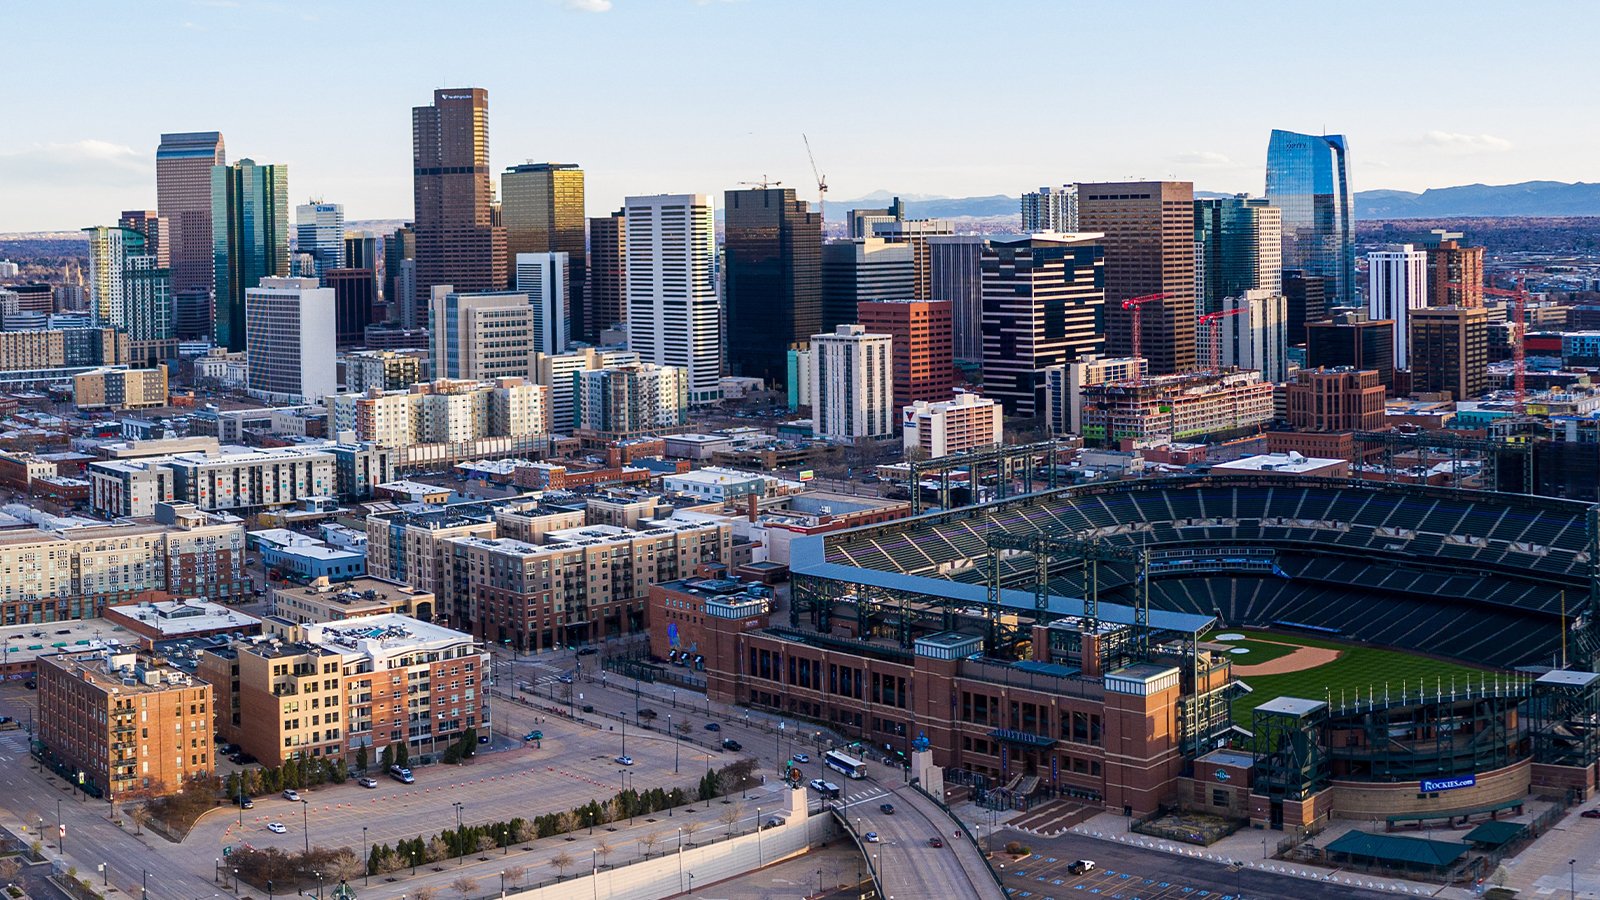 An image of the Denver skyline with Coors Field in the foreground.